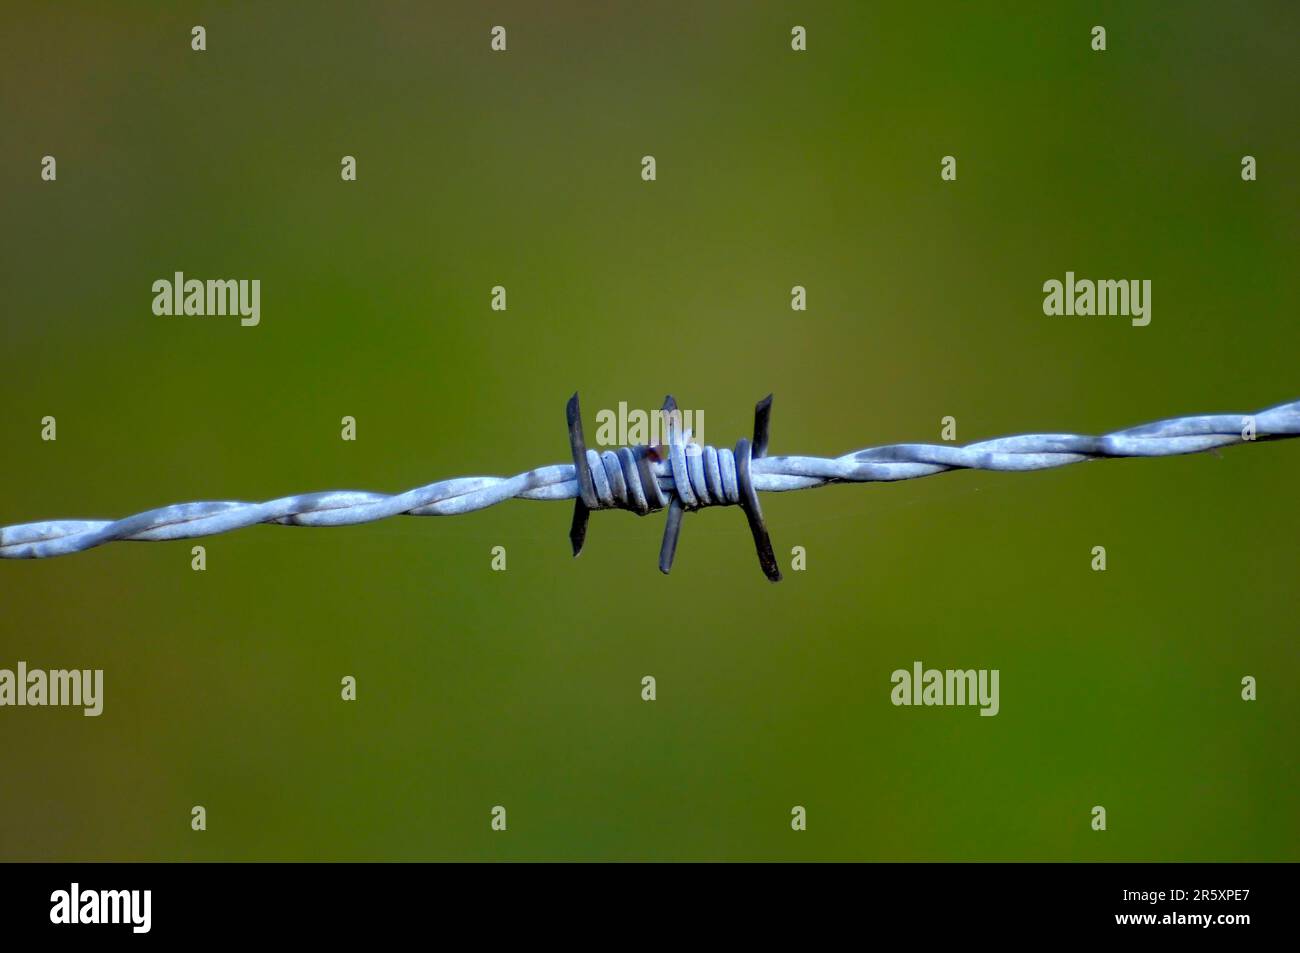 https://c8.alamy.com/comp/2R5XPE7/barbed-wire-wire-tips-or-metal-hooks-2R5XPE7.jpg